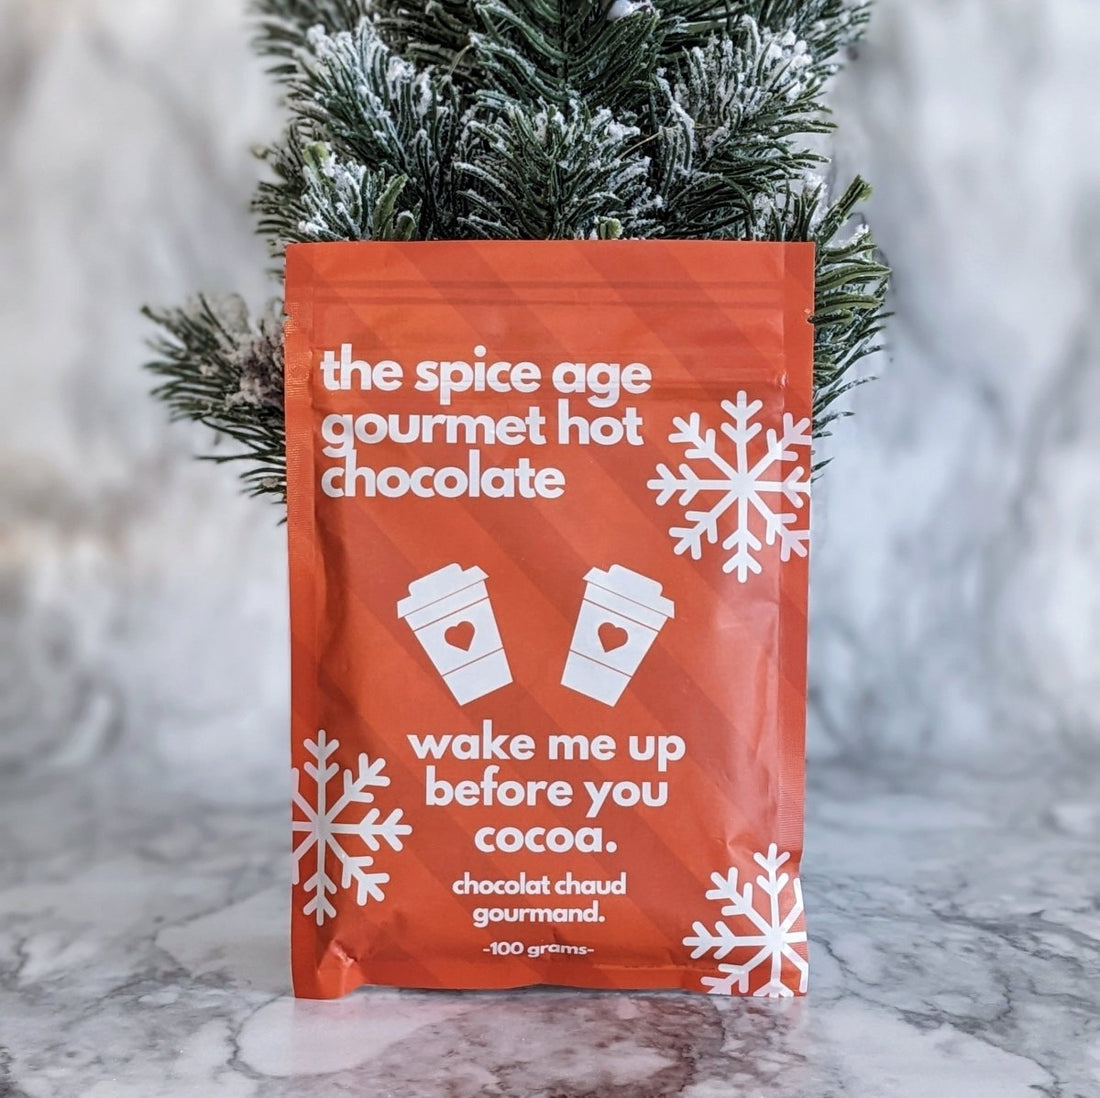 Gourmet Hot Chocolate - 100g - Oonnie - The Spice Age